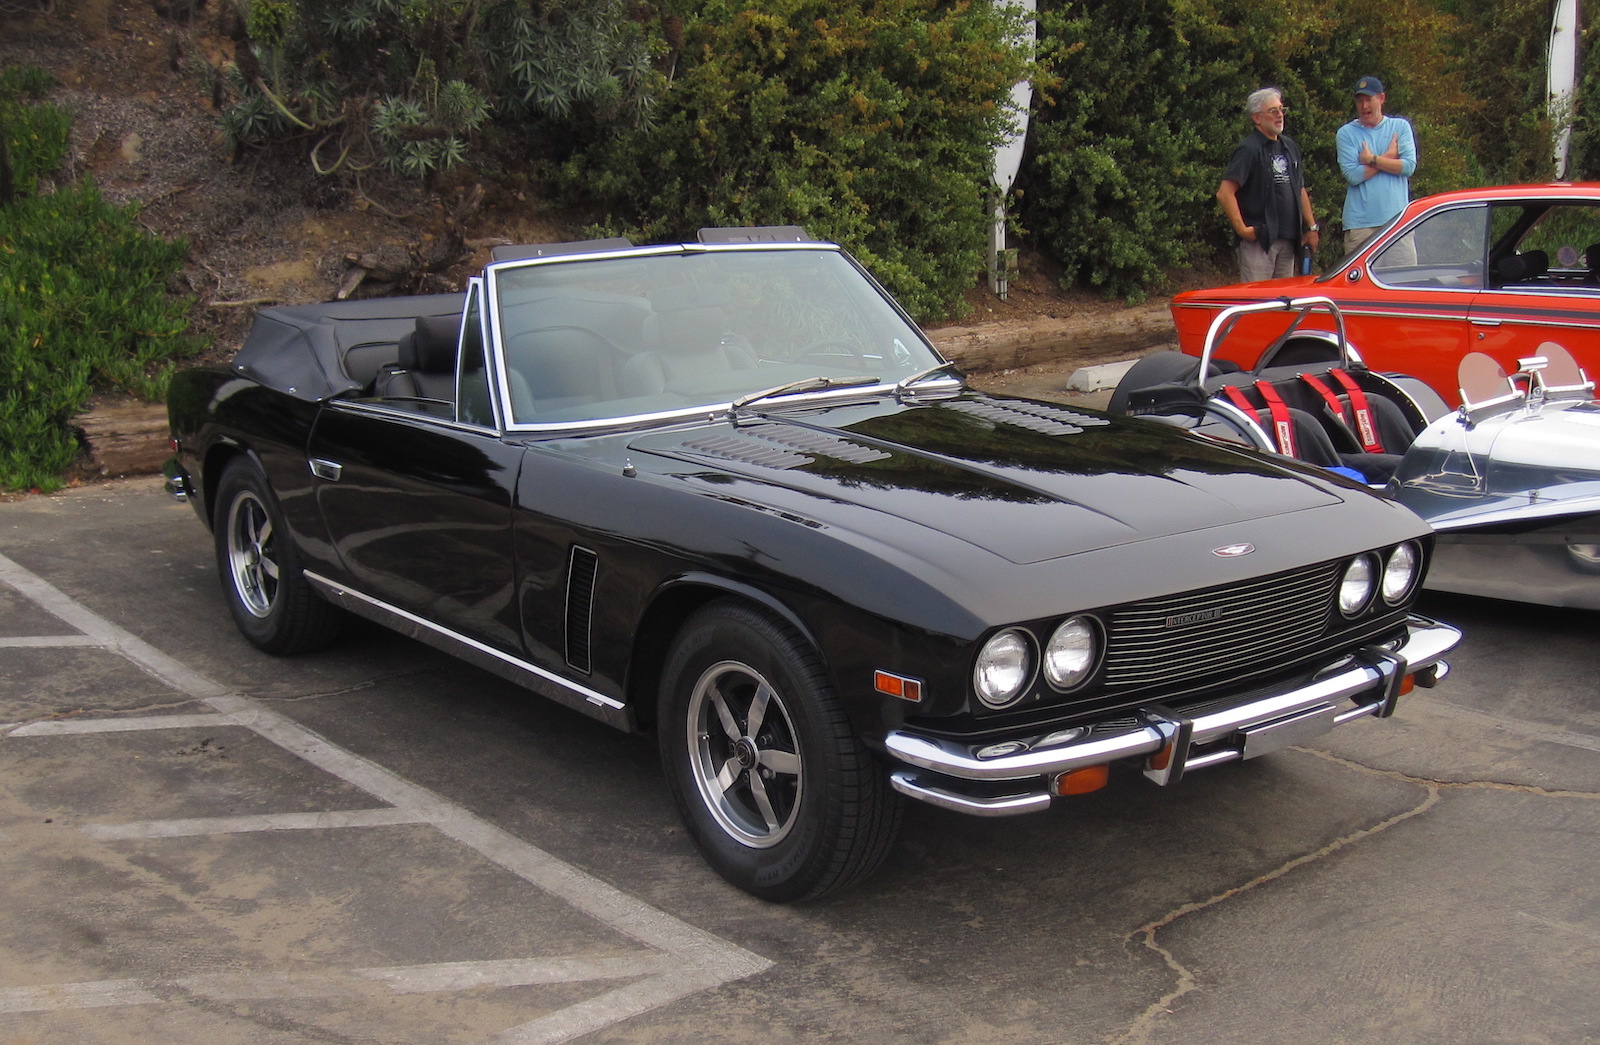 The Next Number One With A Bullet: Jensen Interceptor Convertible